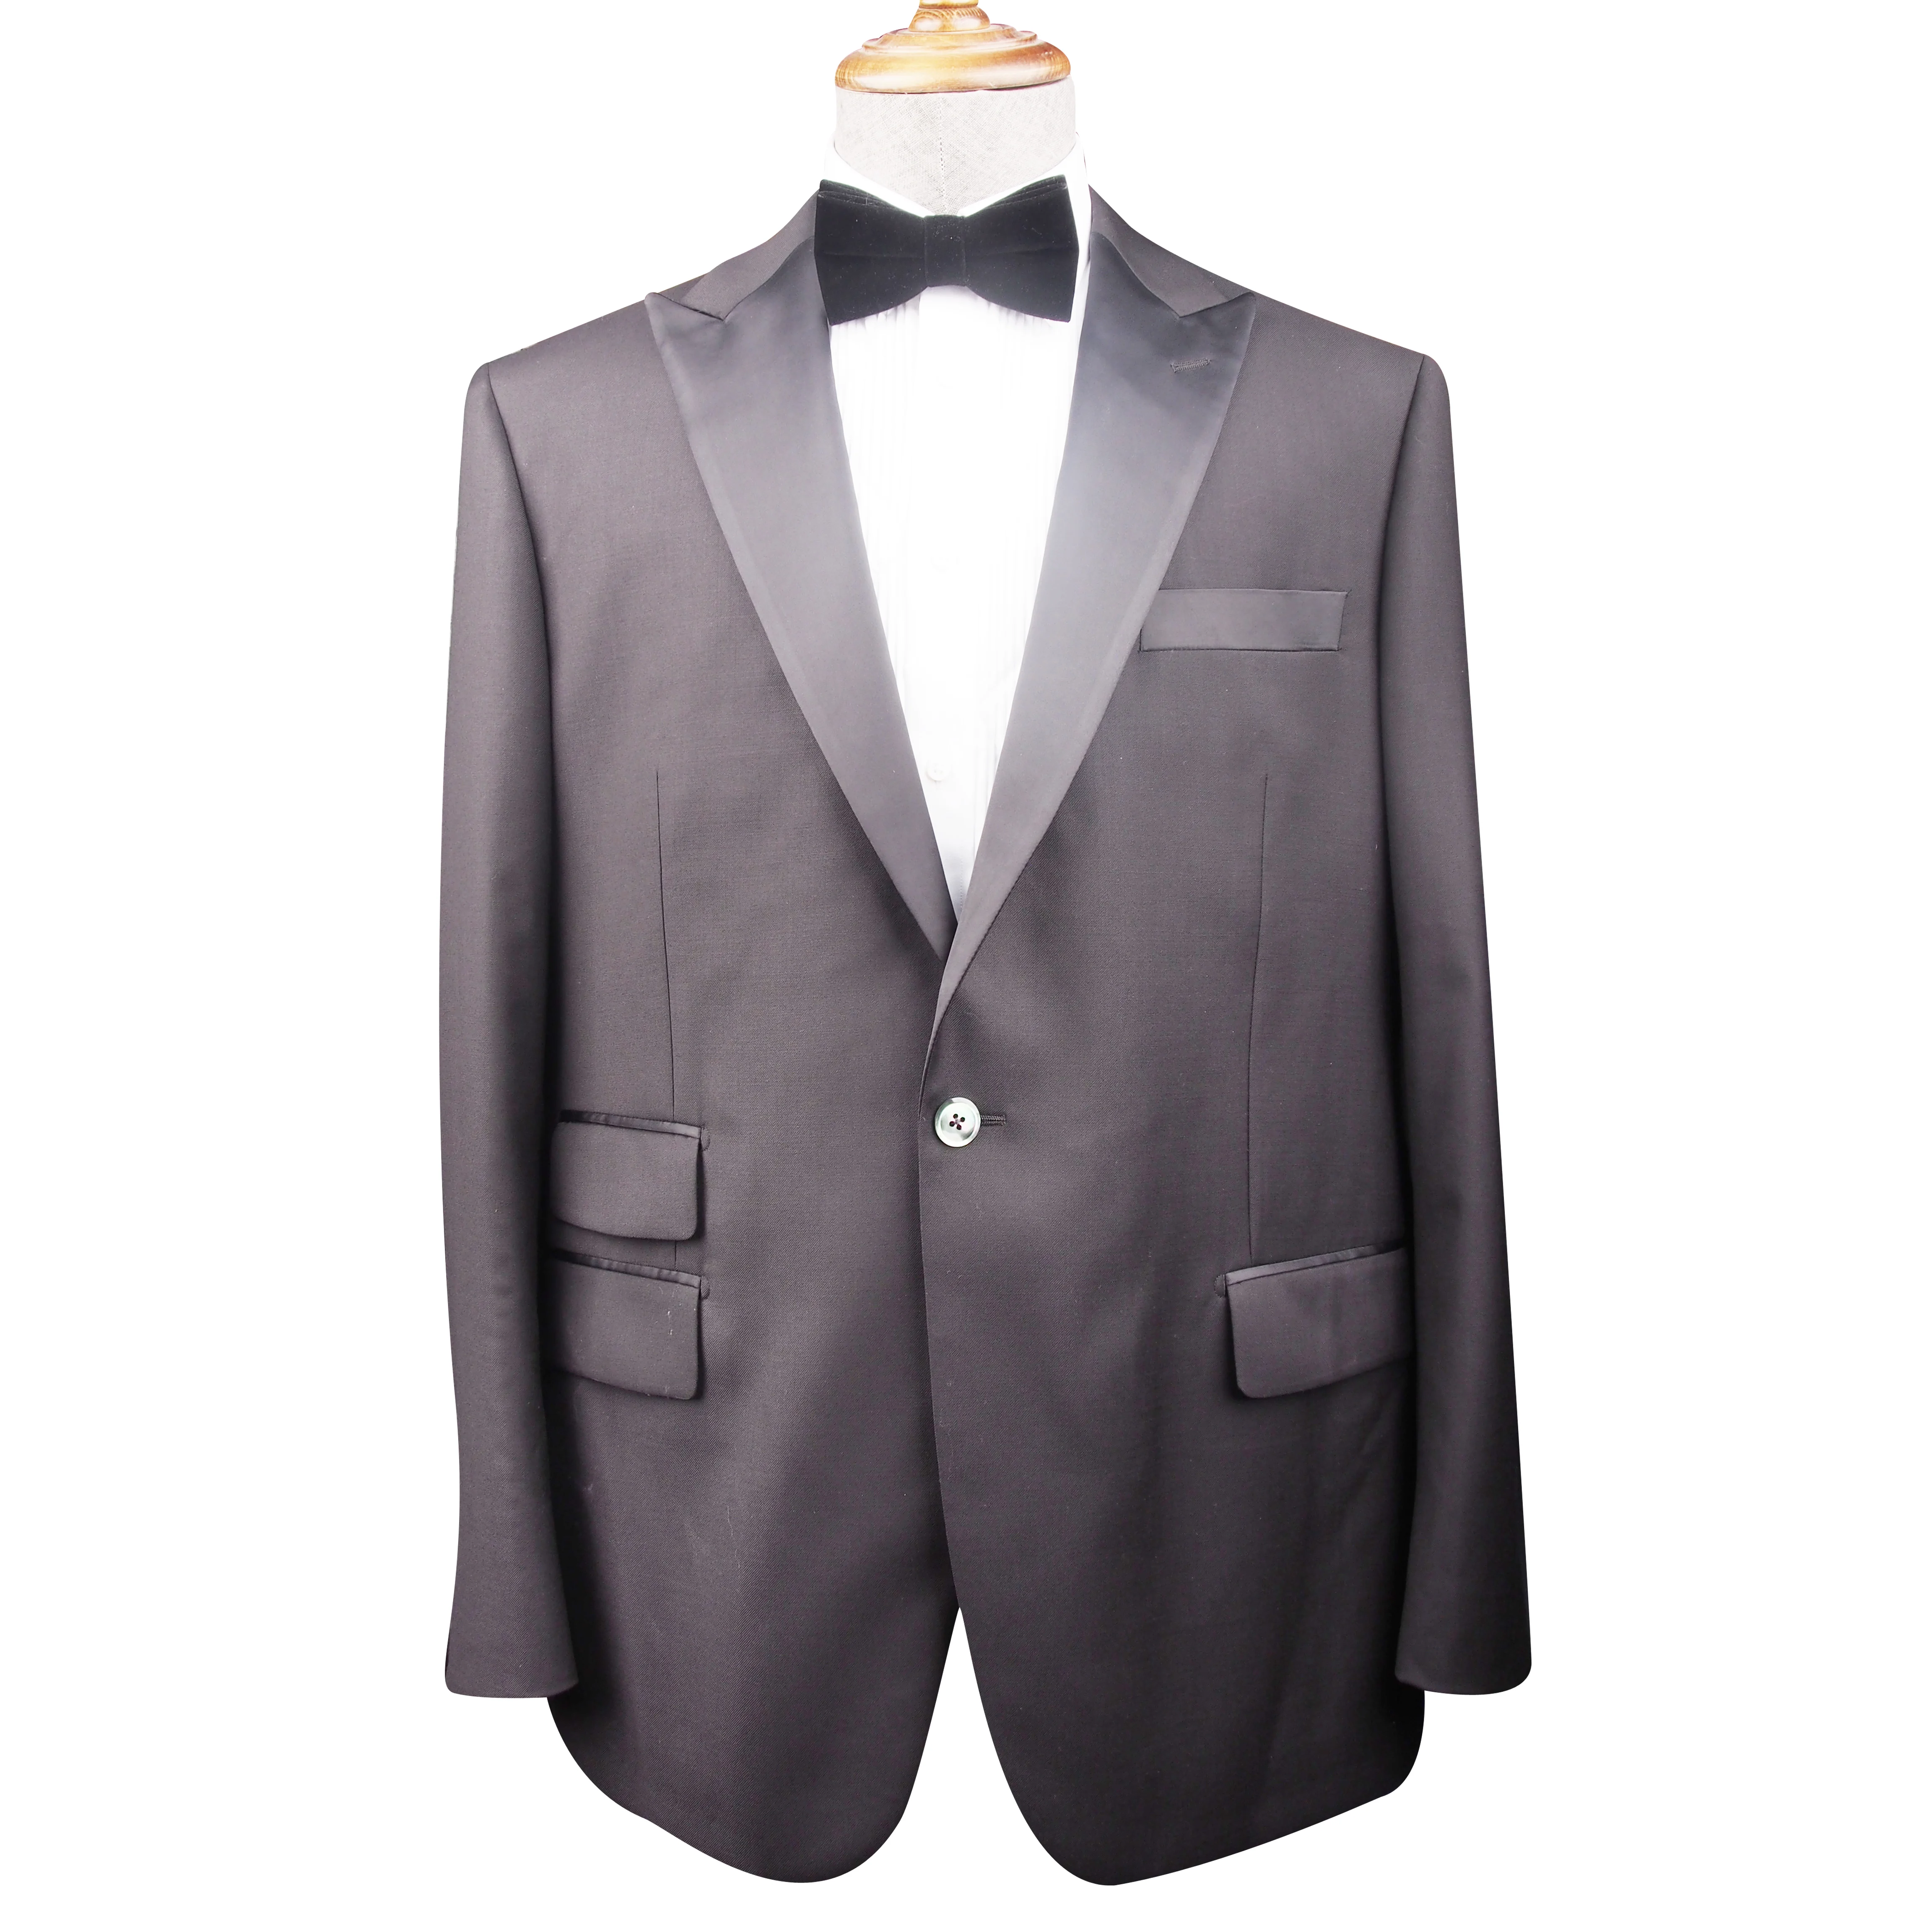 made in China wholesale 2 Stücke 100% Wool  Tuxedo Suit modern men’s suit